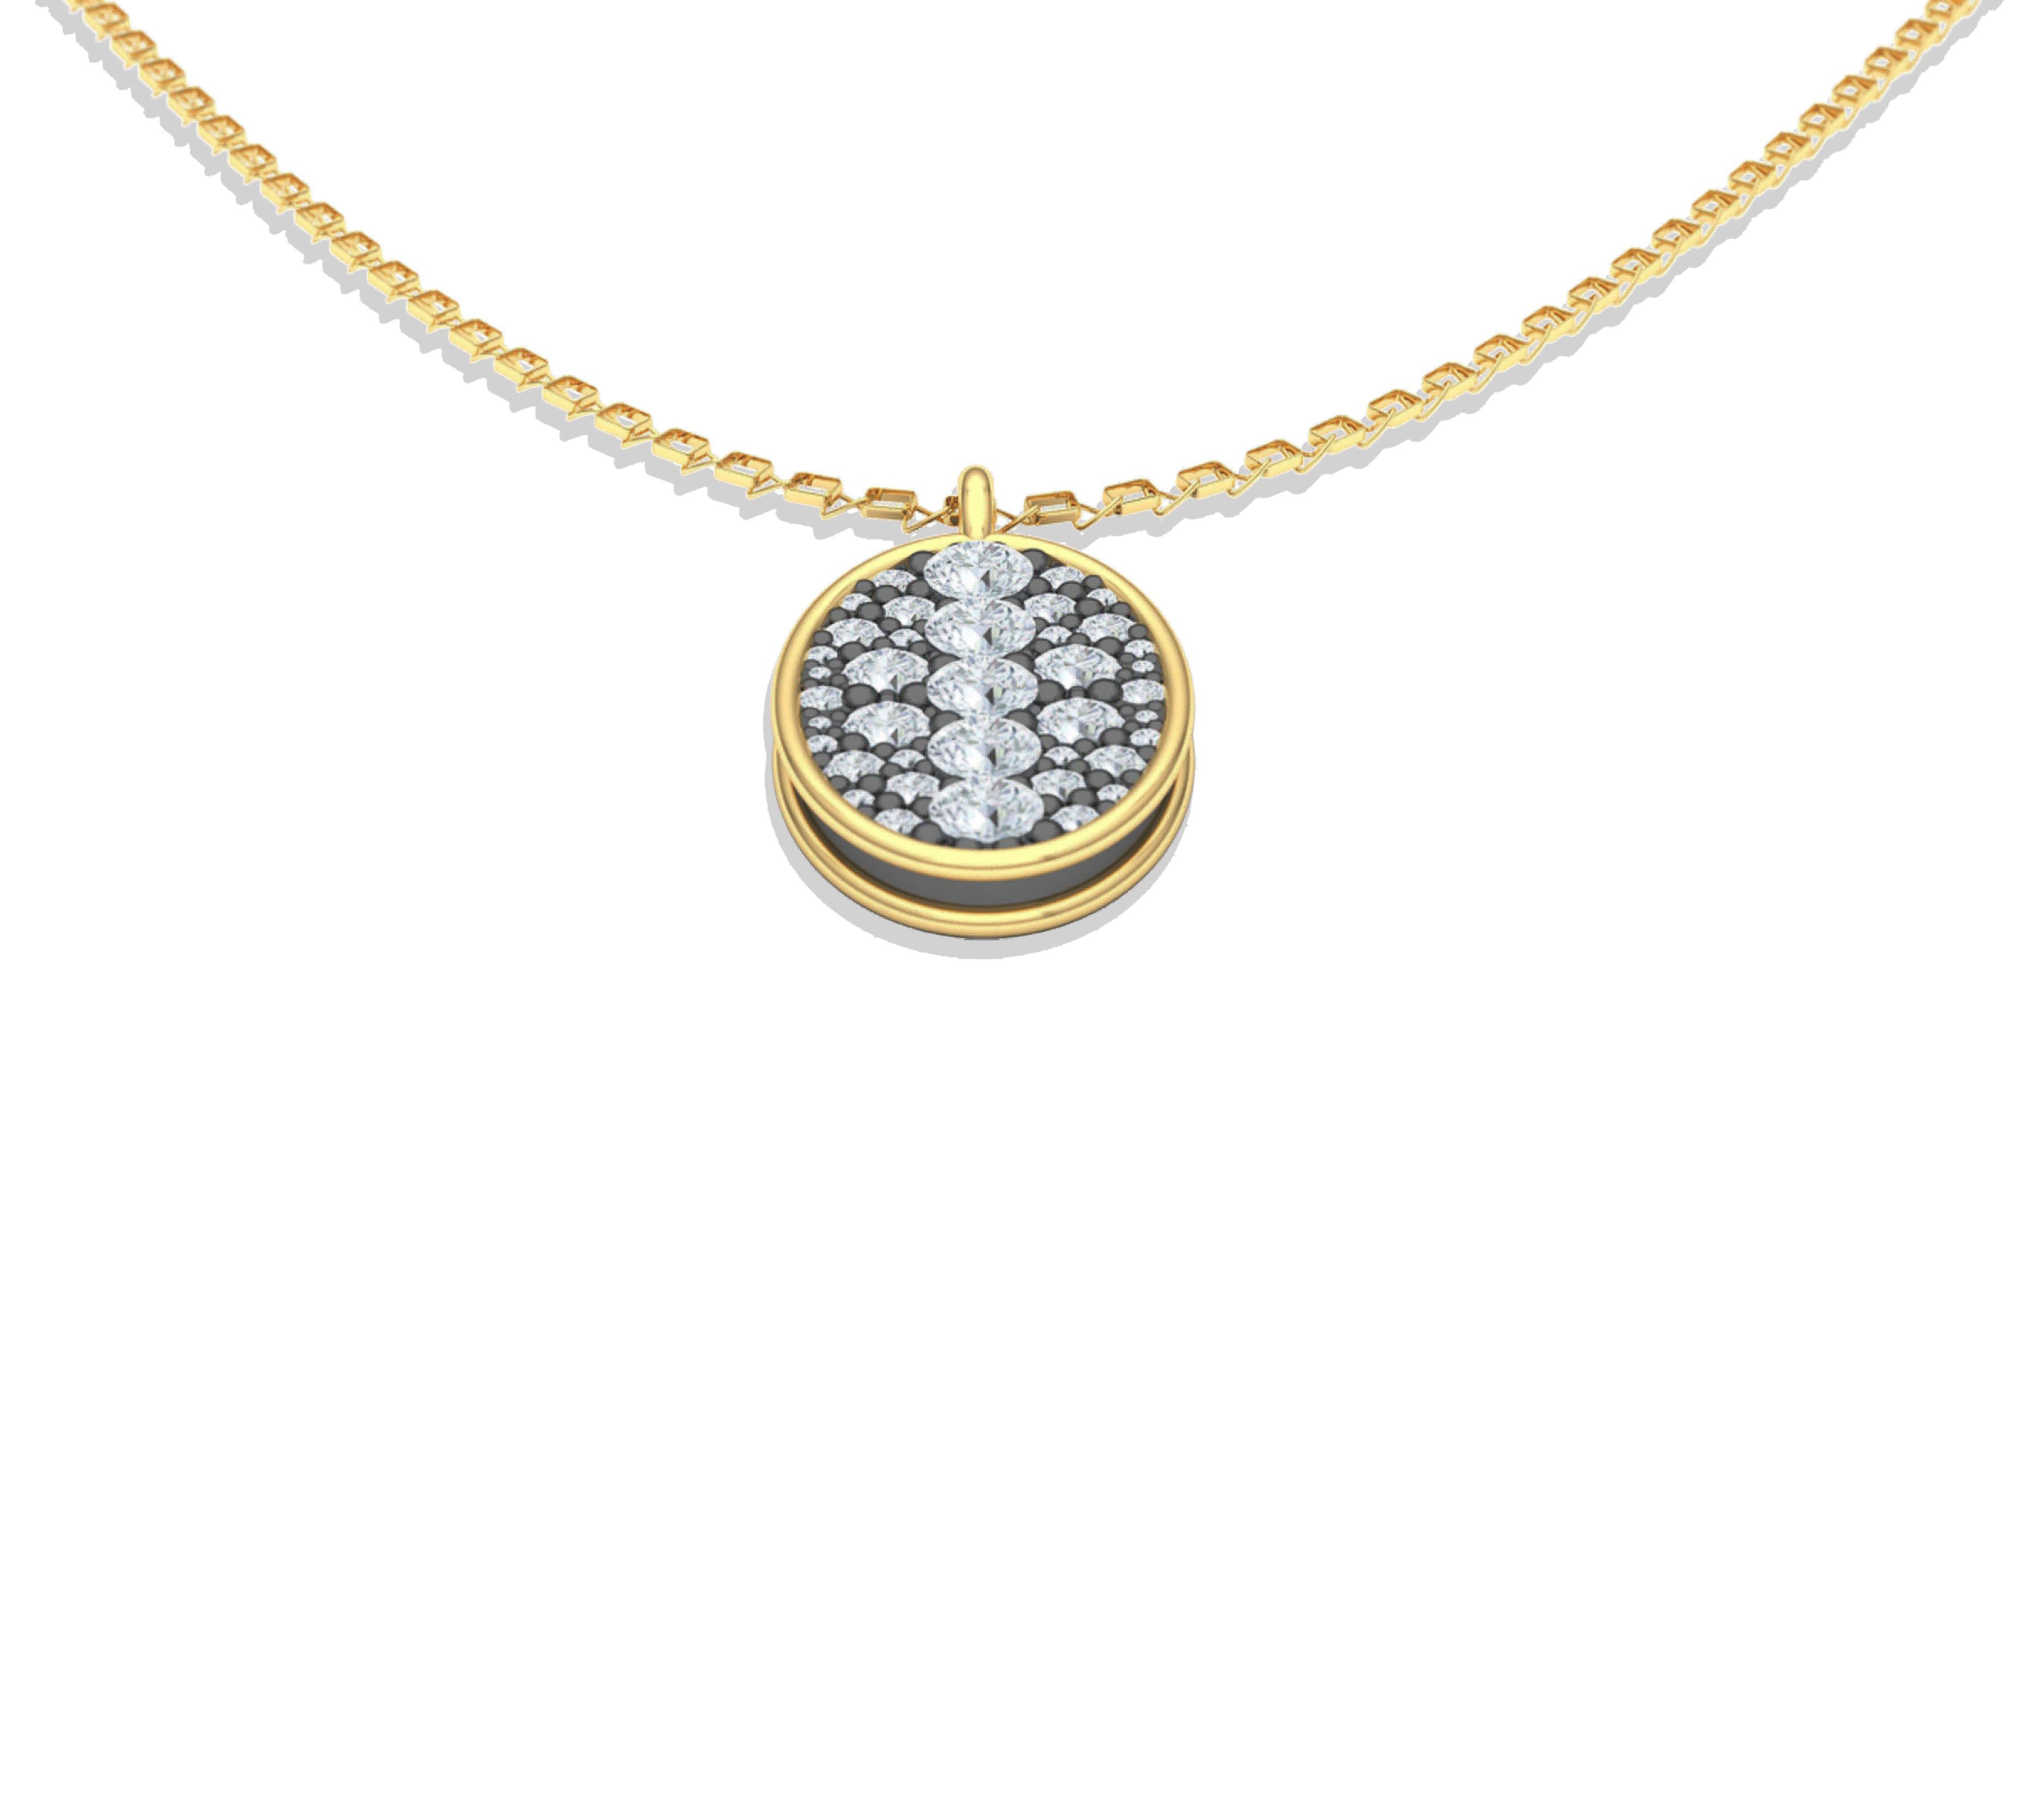 A stunning necklace that has over 2 carats of round brilliant diamonds set in blackened silver and 18k yellow gold.  The diamond pendant has gorgeous cut round brilliant diamonds and have a color and clarity of F-G VS -SI.  The rim of the pendant